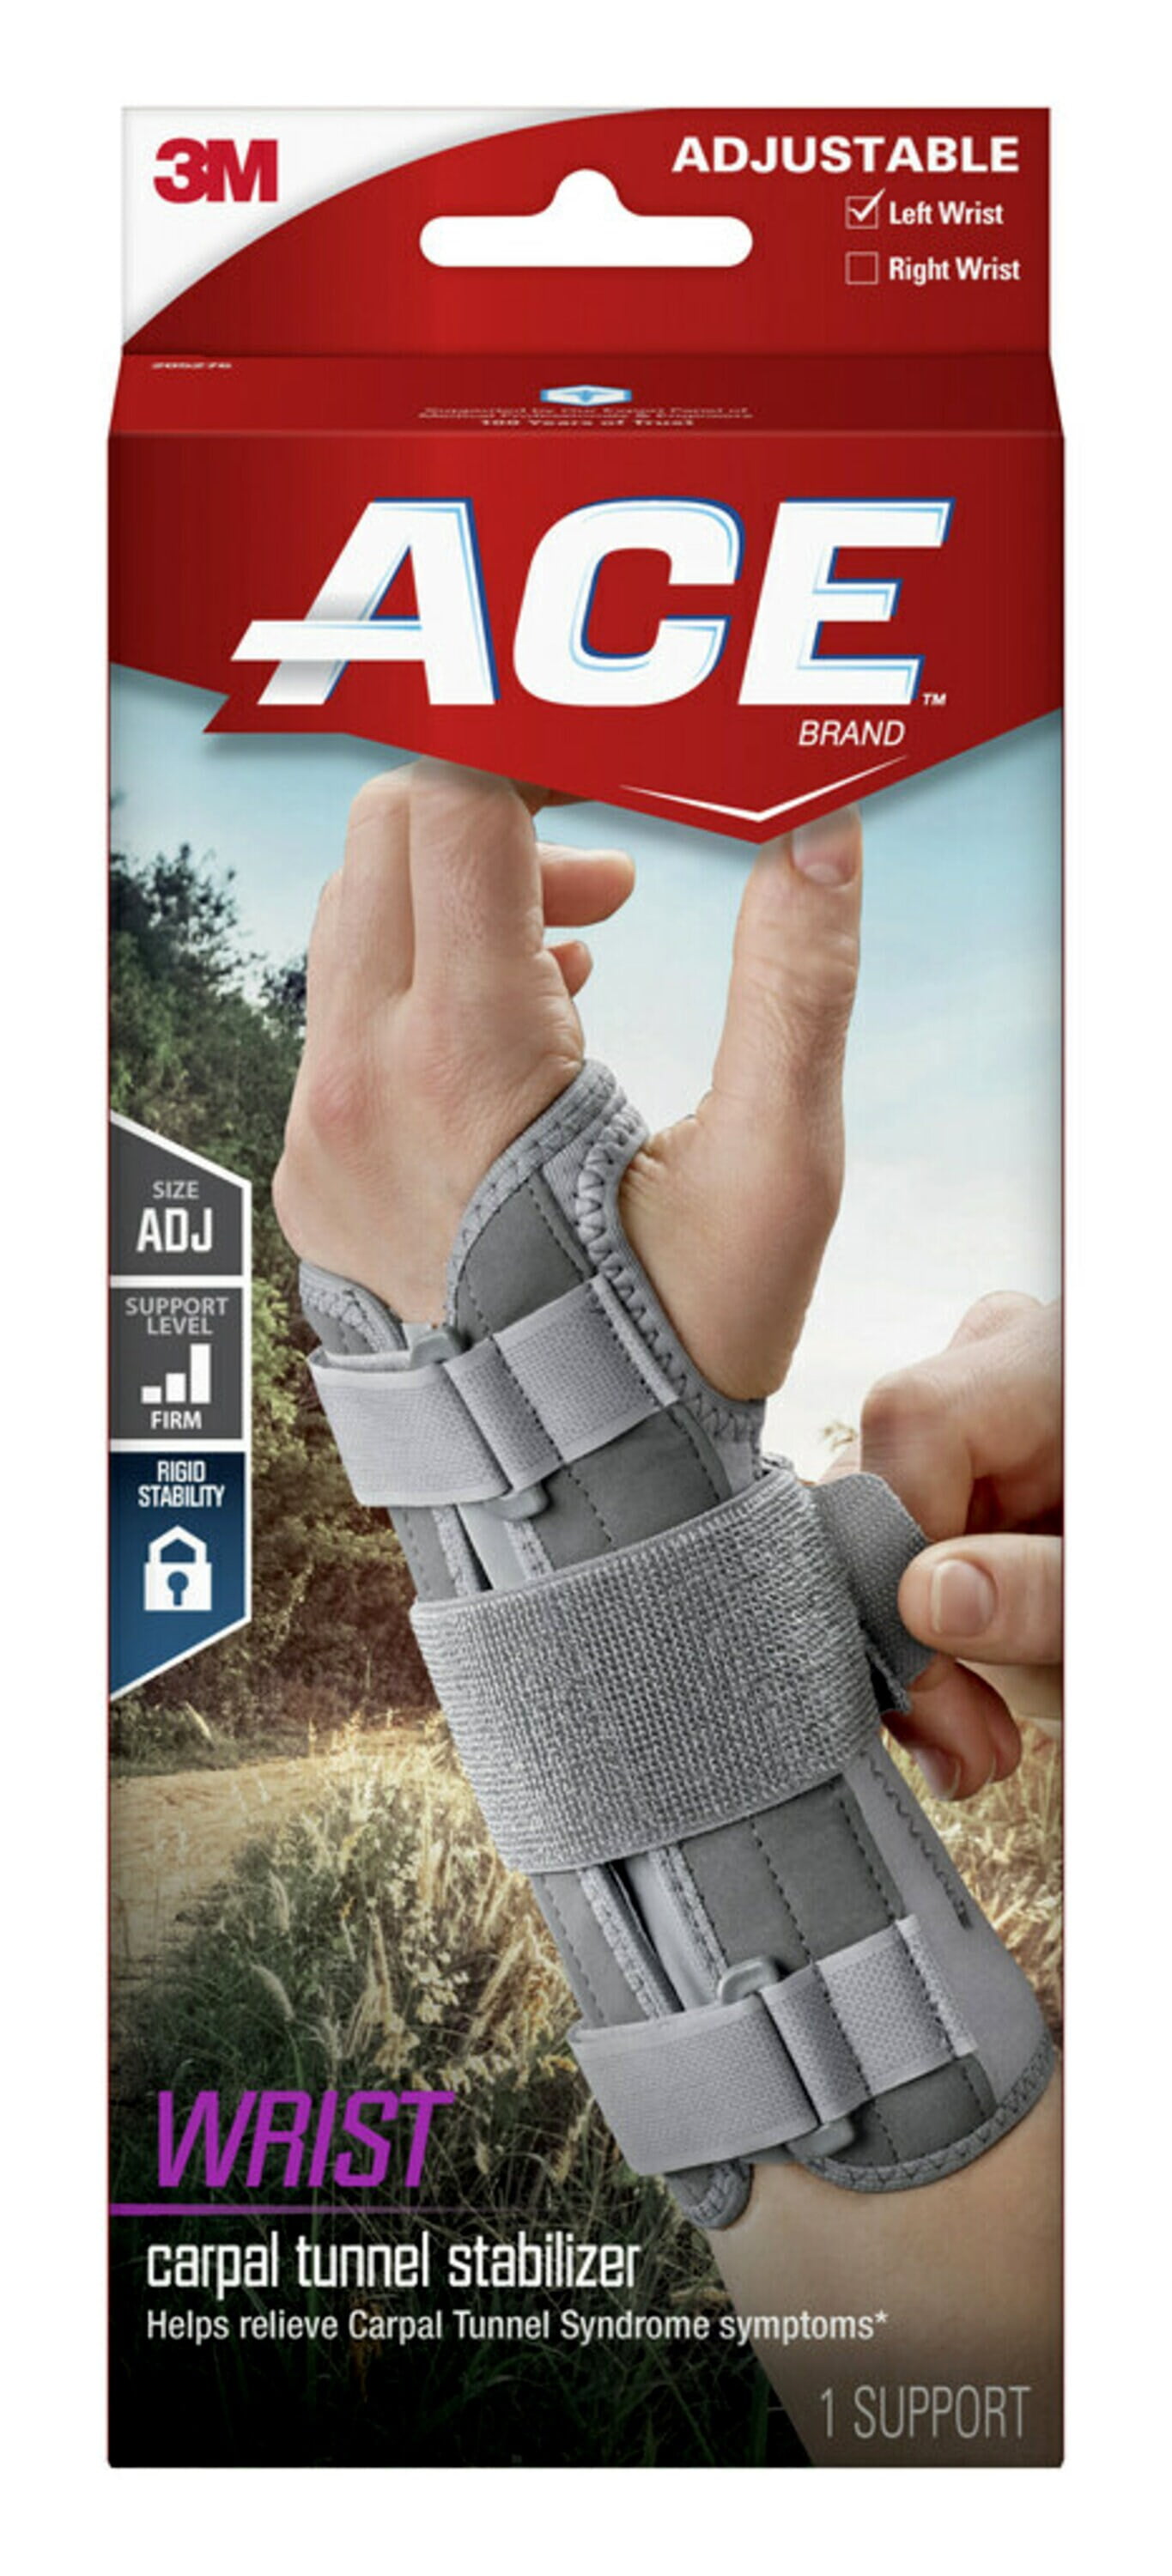 ACE Brand Carpal Tunnel Wrist Stabilizer, Grey – One Size Fits Most